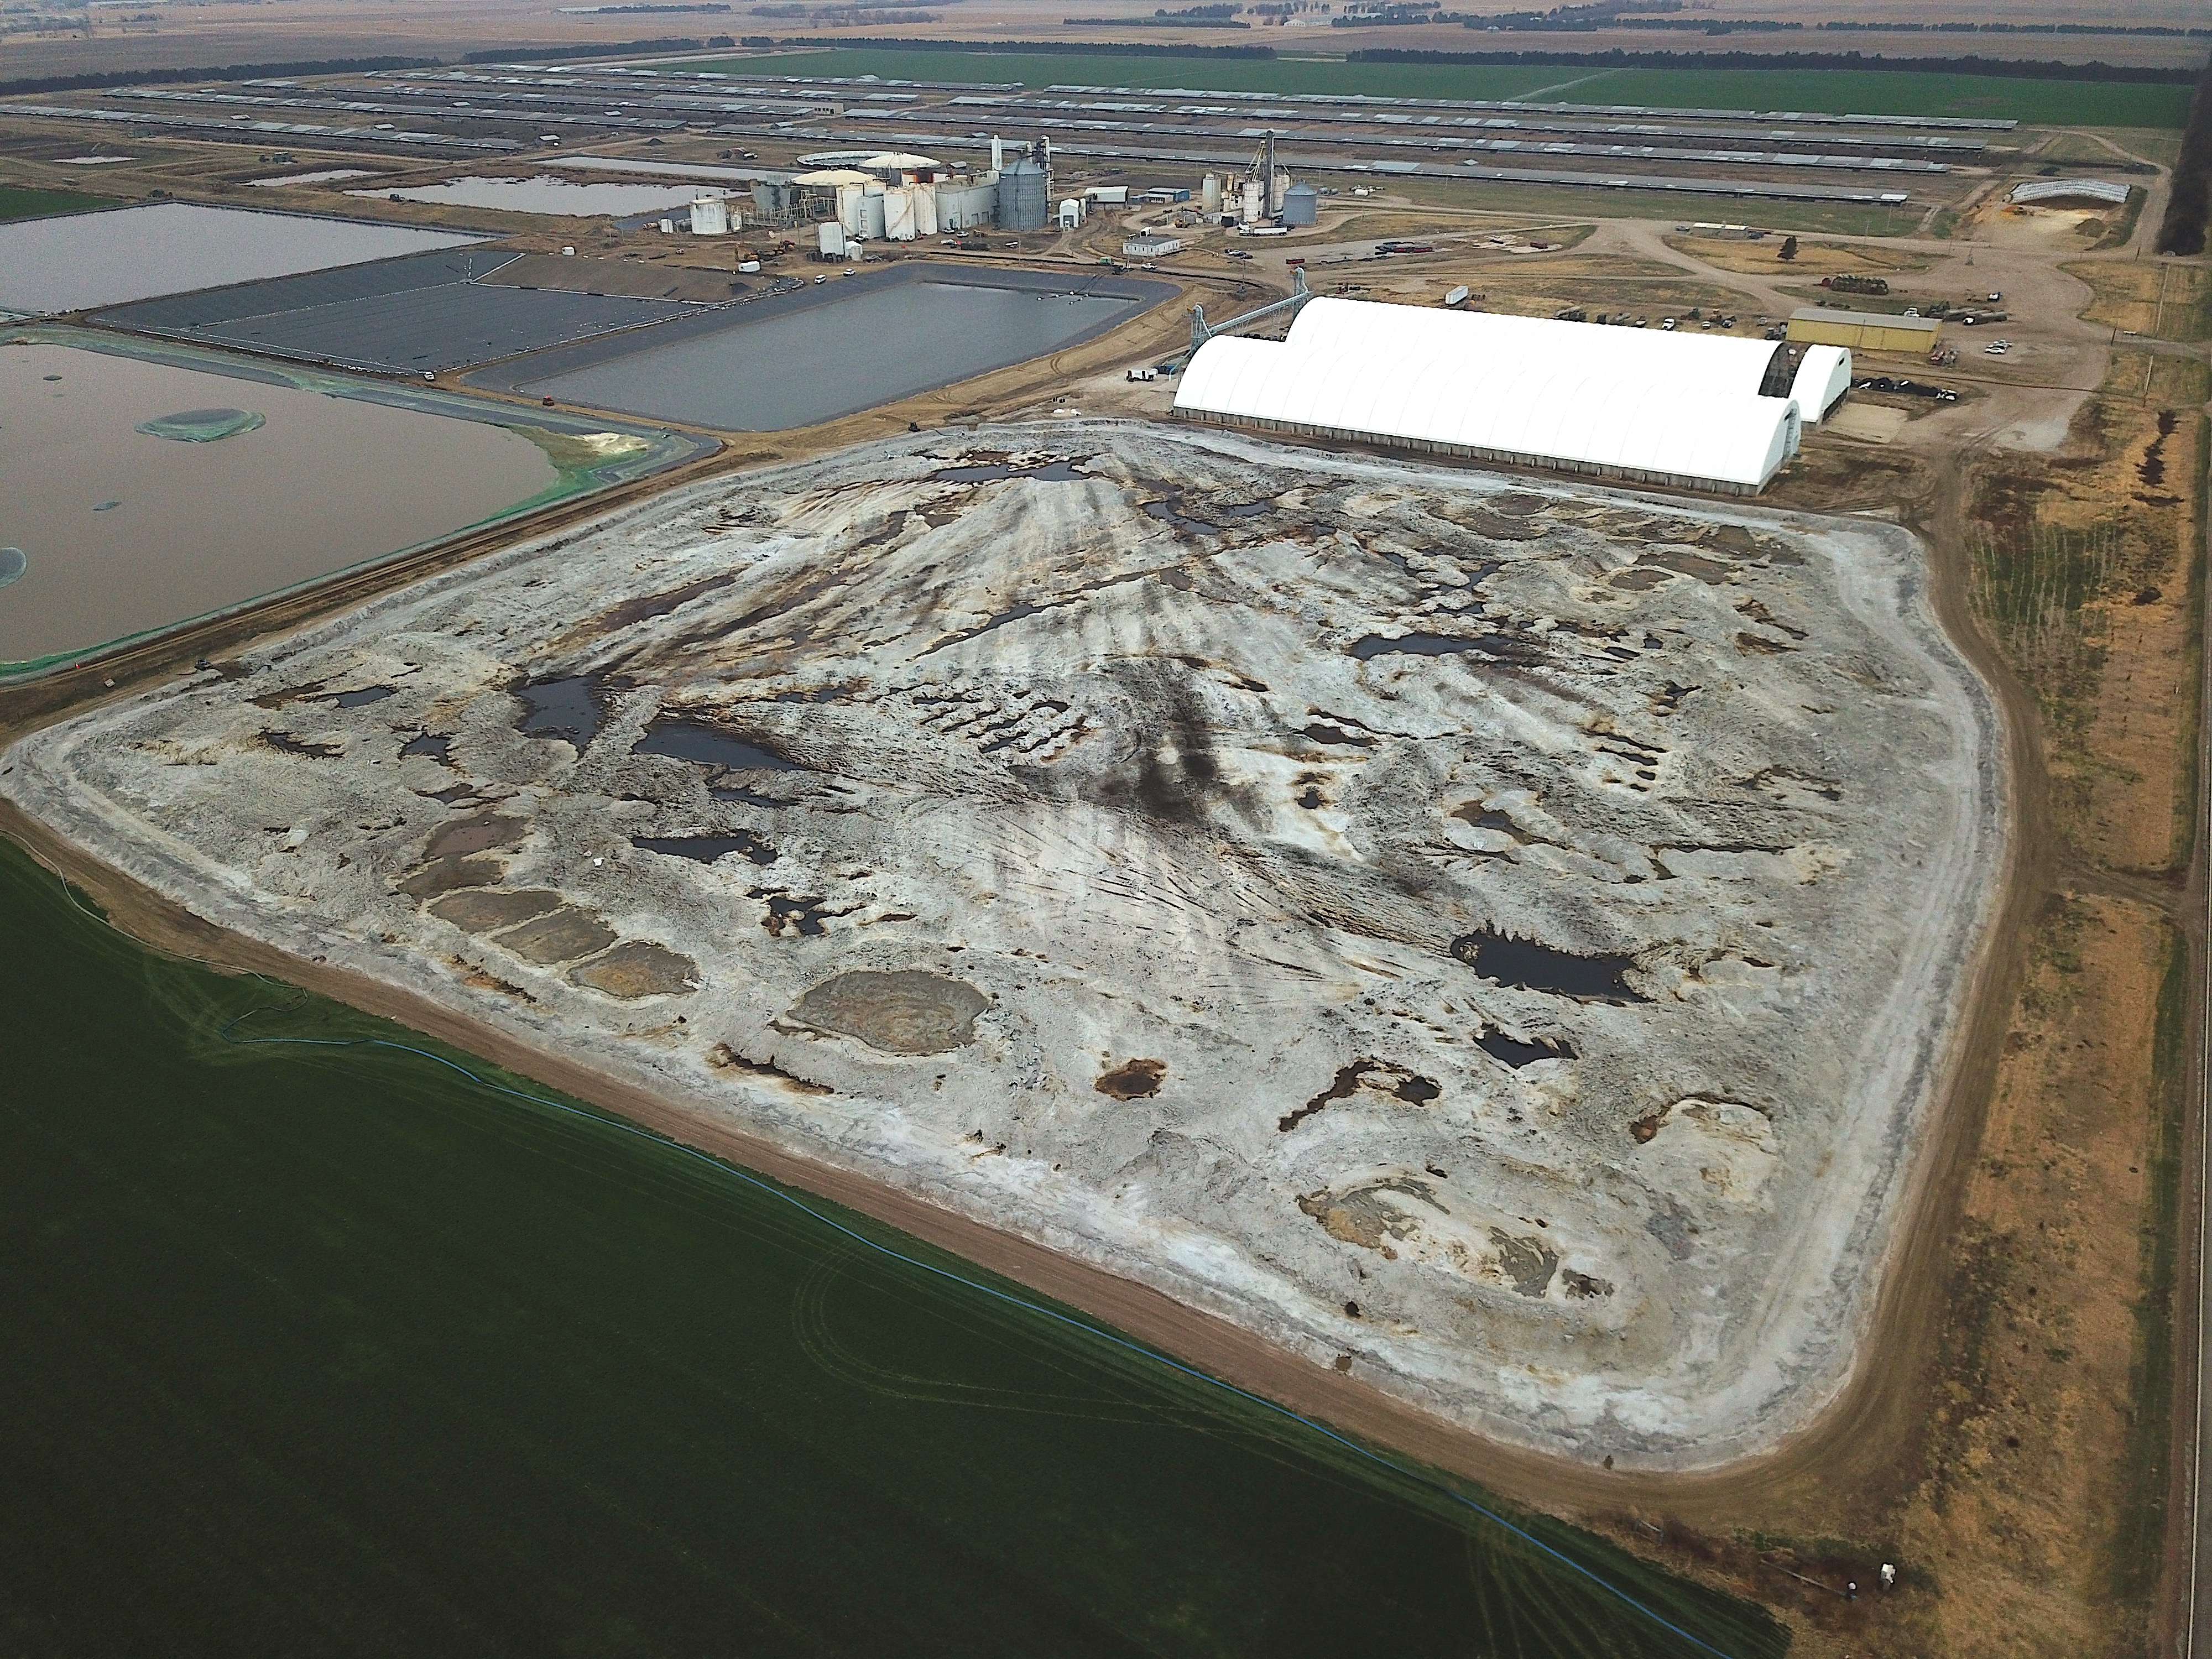 A view from the air shows the pile of waste covered in a gray coating.